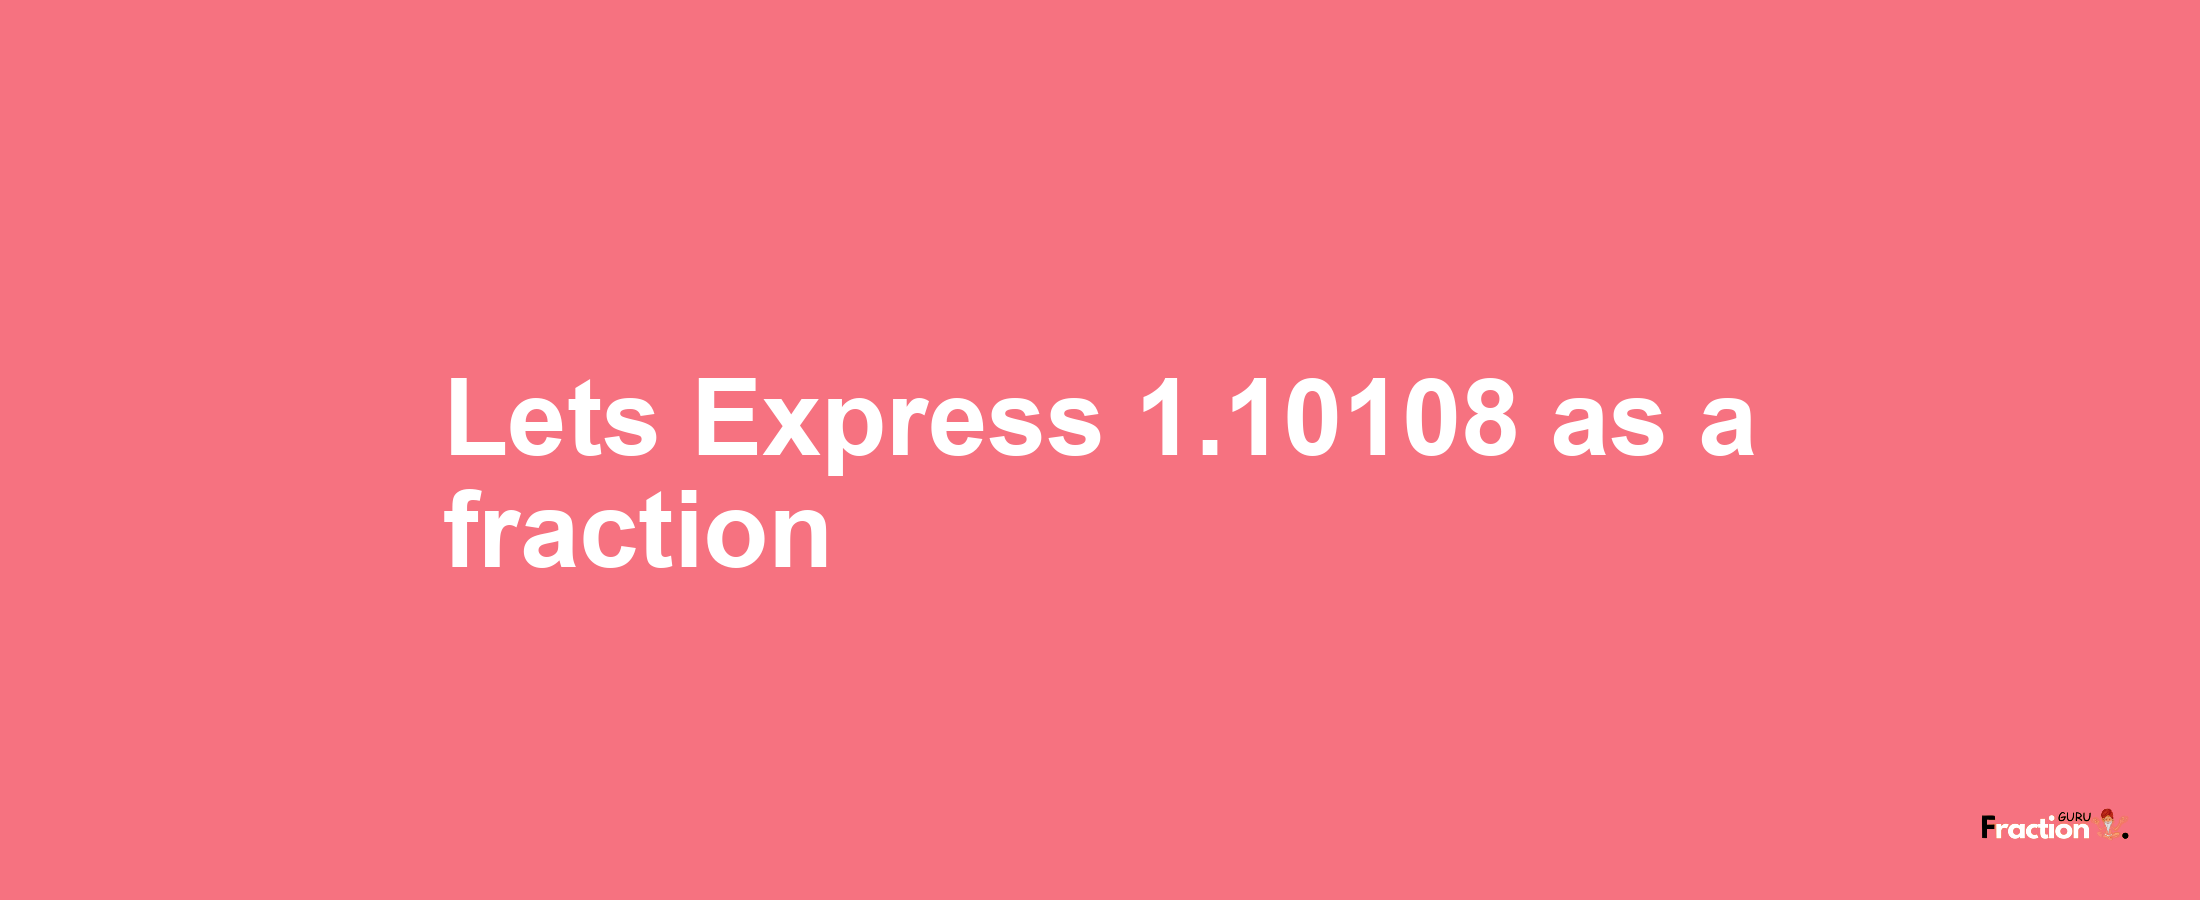 Lets Express 1.10108 as afraction